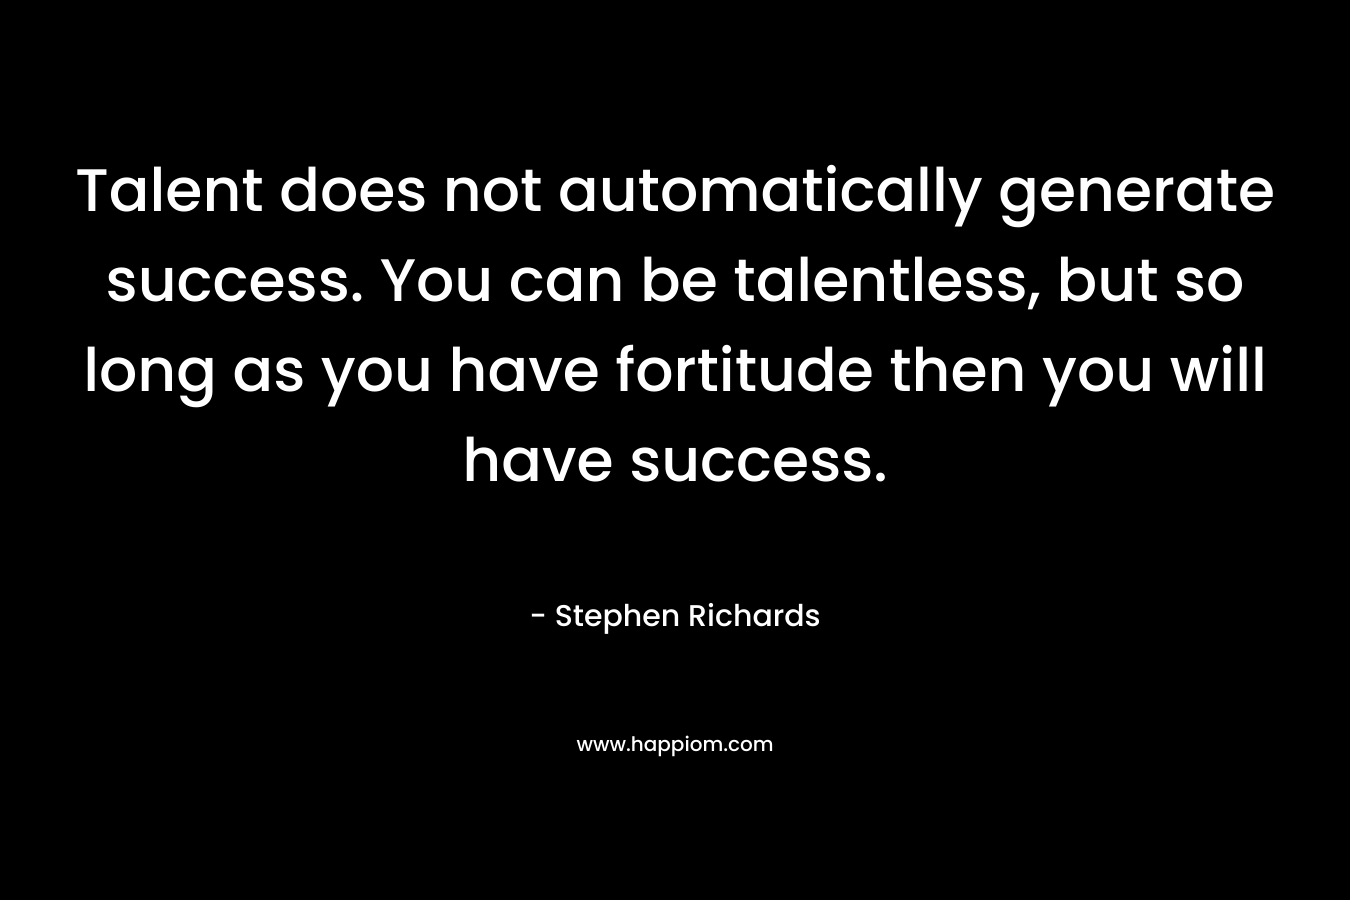 Talent does not automatically generate success. You can be talentless, but so long as you have fortitude then you will have success.